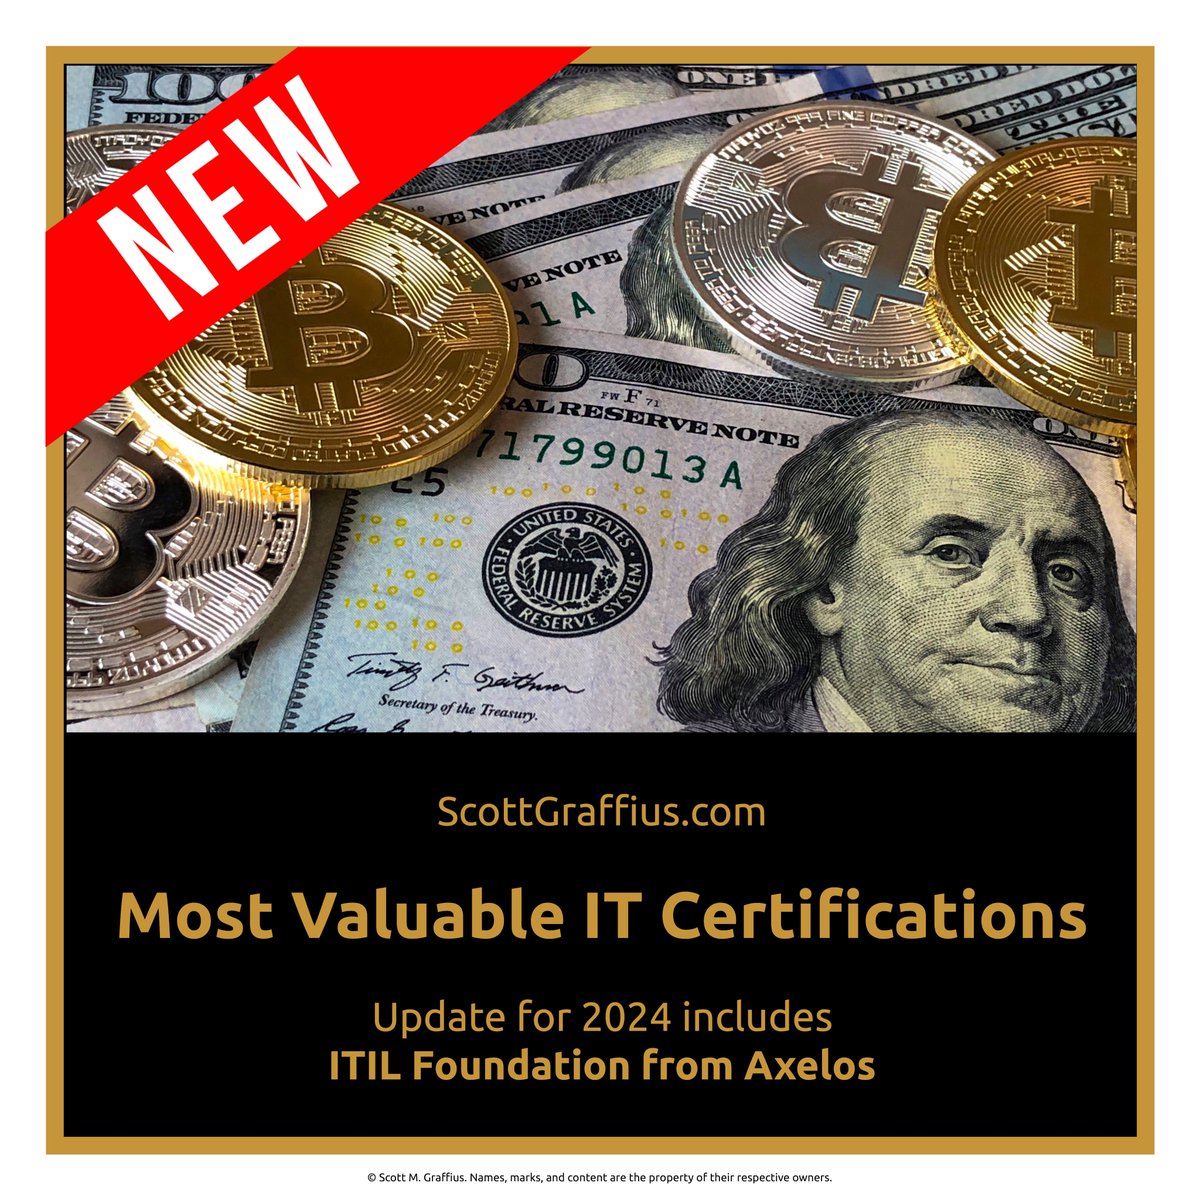 ‘Most Valuable IT Certifications’ includes the ITIL from Axelos. Details on it — and the other certifications on the list — are here: scottgraffius.com/blog/files/it-…. #Axelos #IT #ITIL #ITIL4 #ITILFoundation #InformationTechnology #ITCertification #Tech #Technology #TechCertification